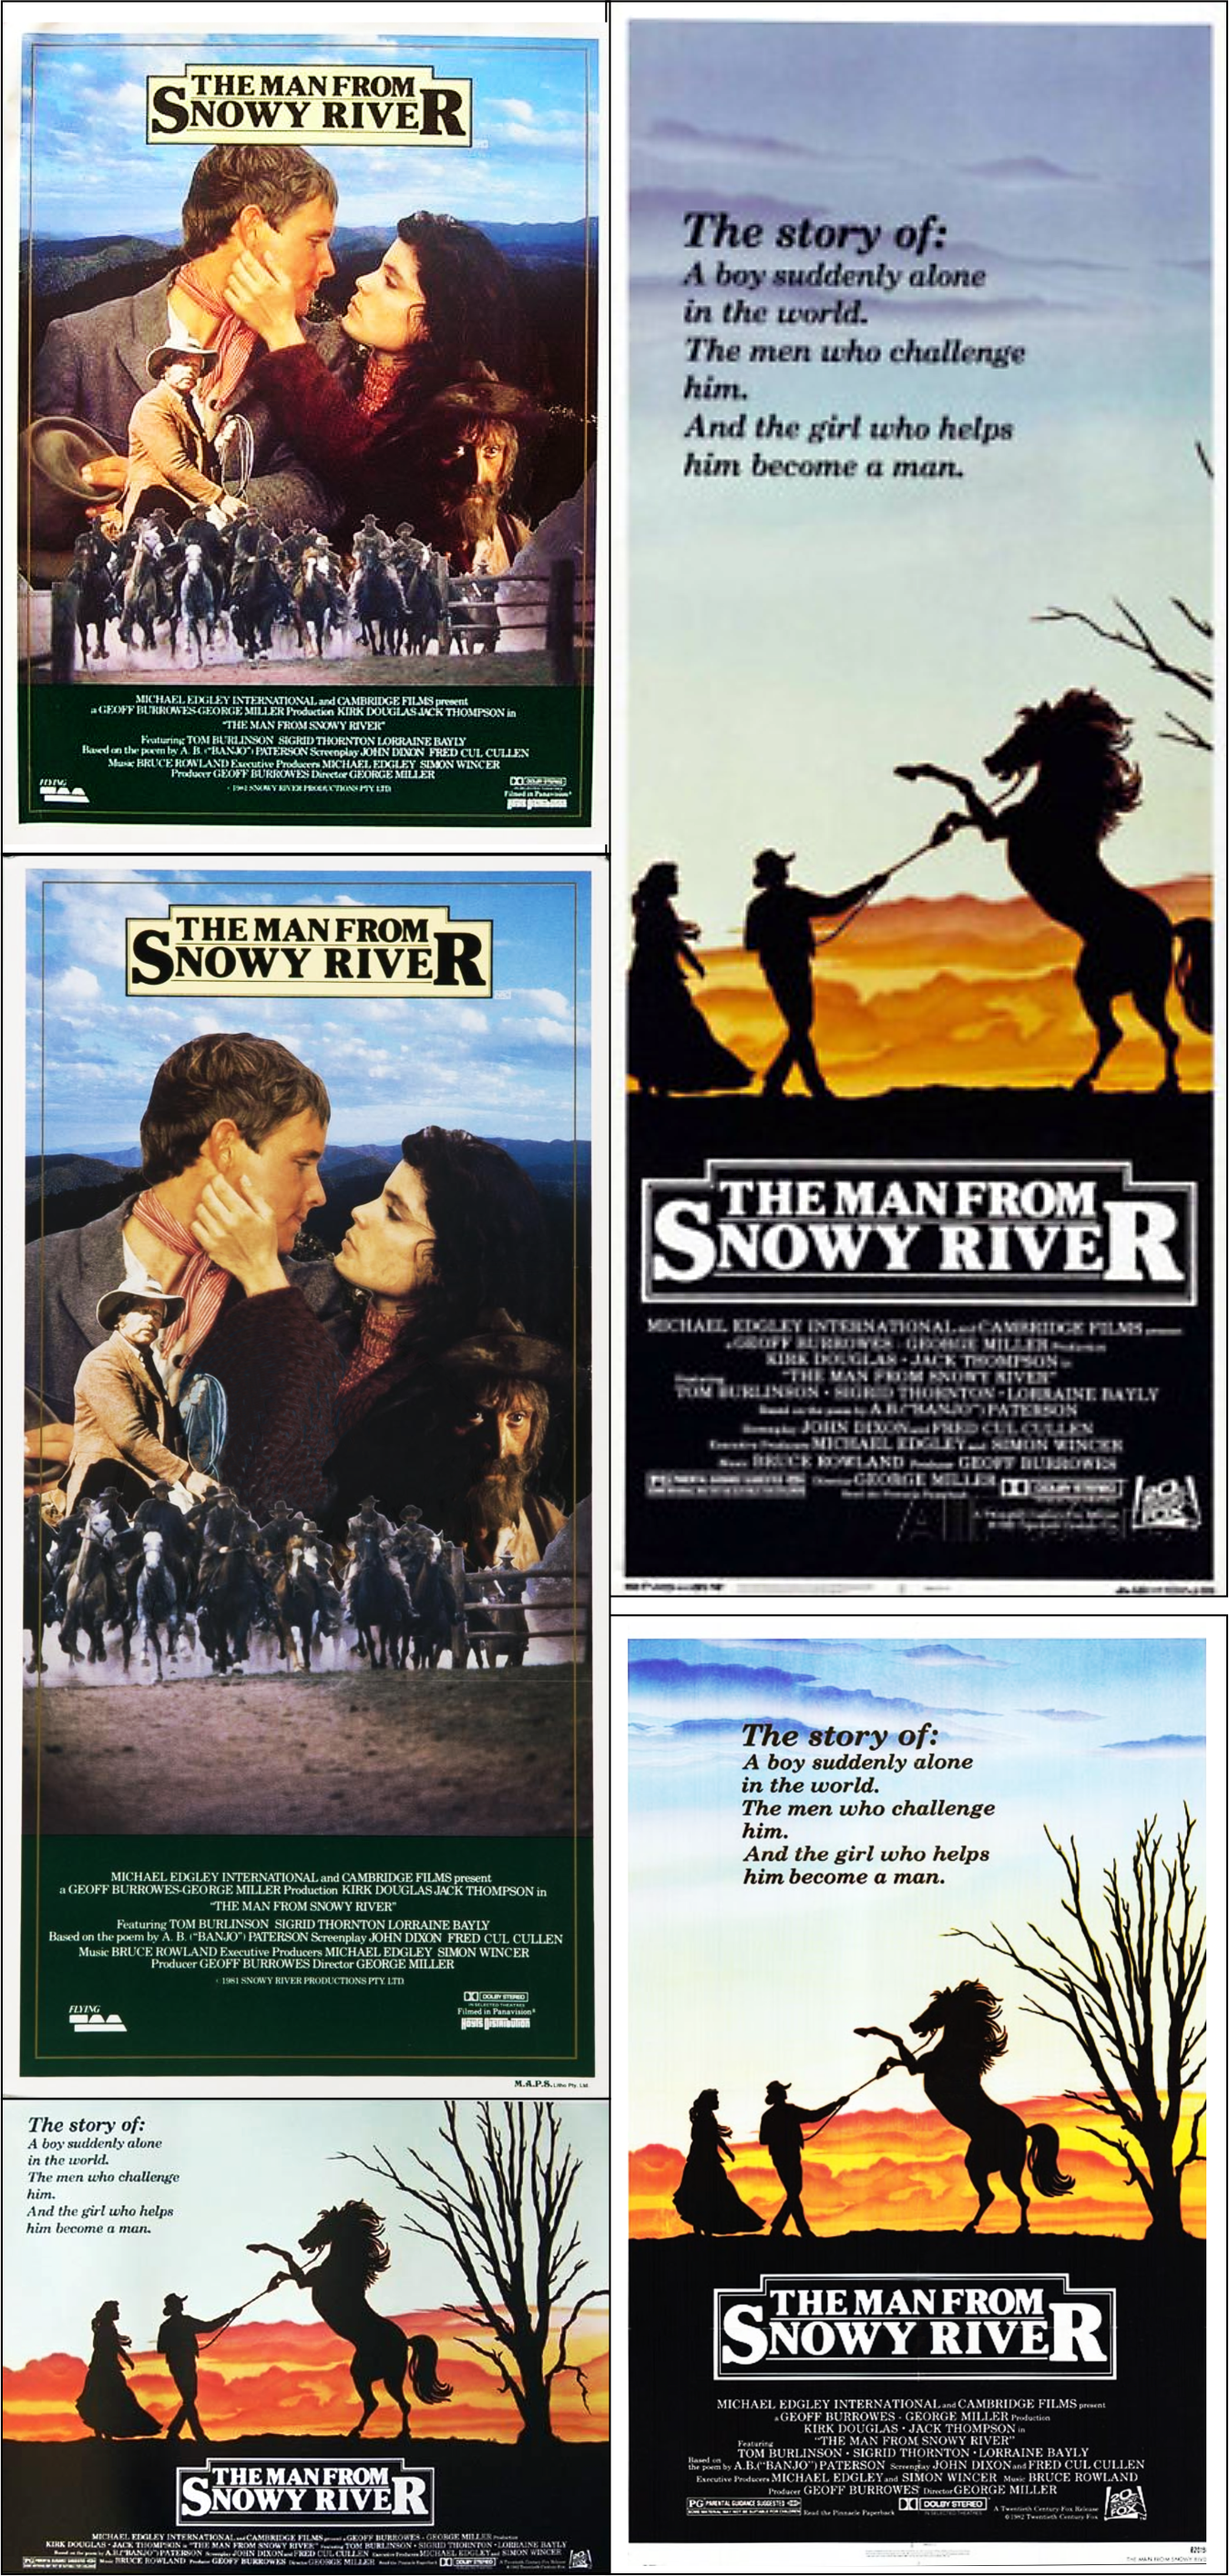 The Man from Snowy River posters